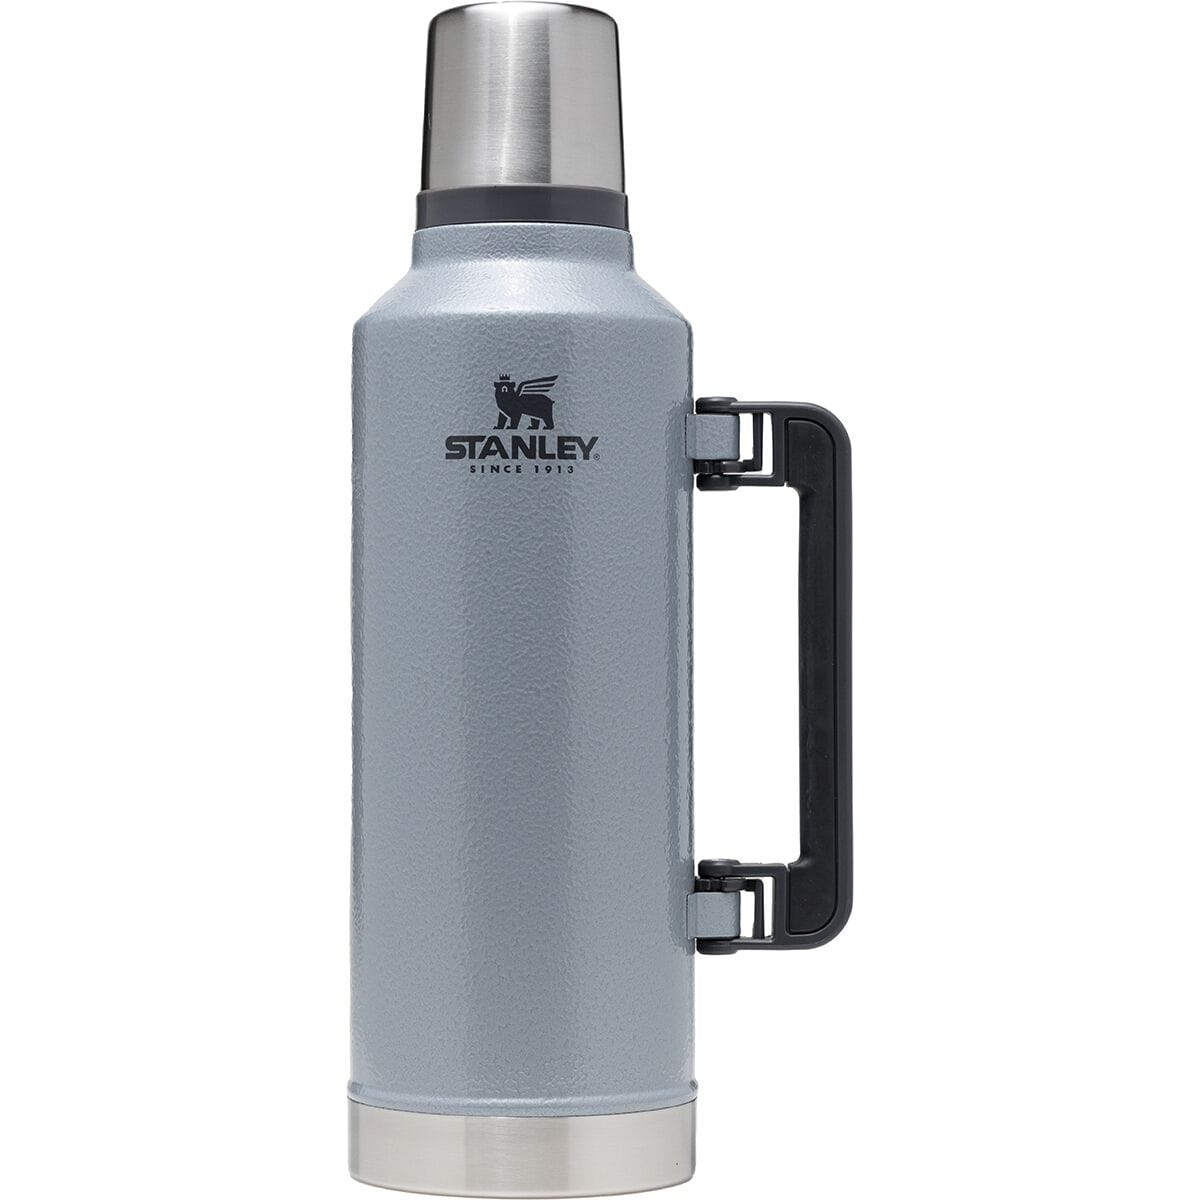 Seaside Surf x Stanley Vacuum Insulated 1.5 Qt Classic Thermos - Night